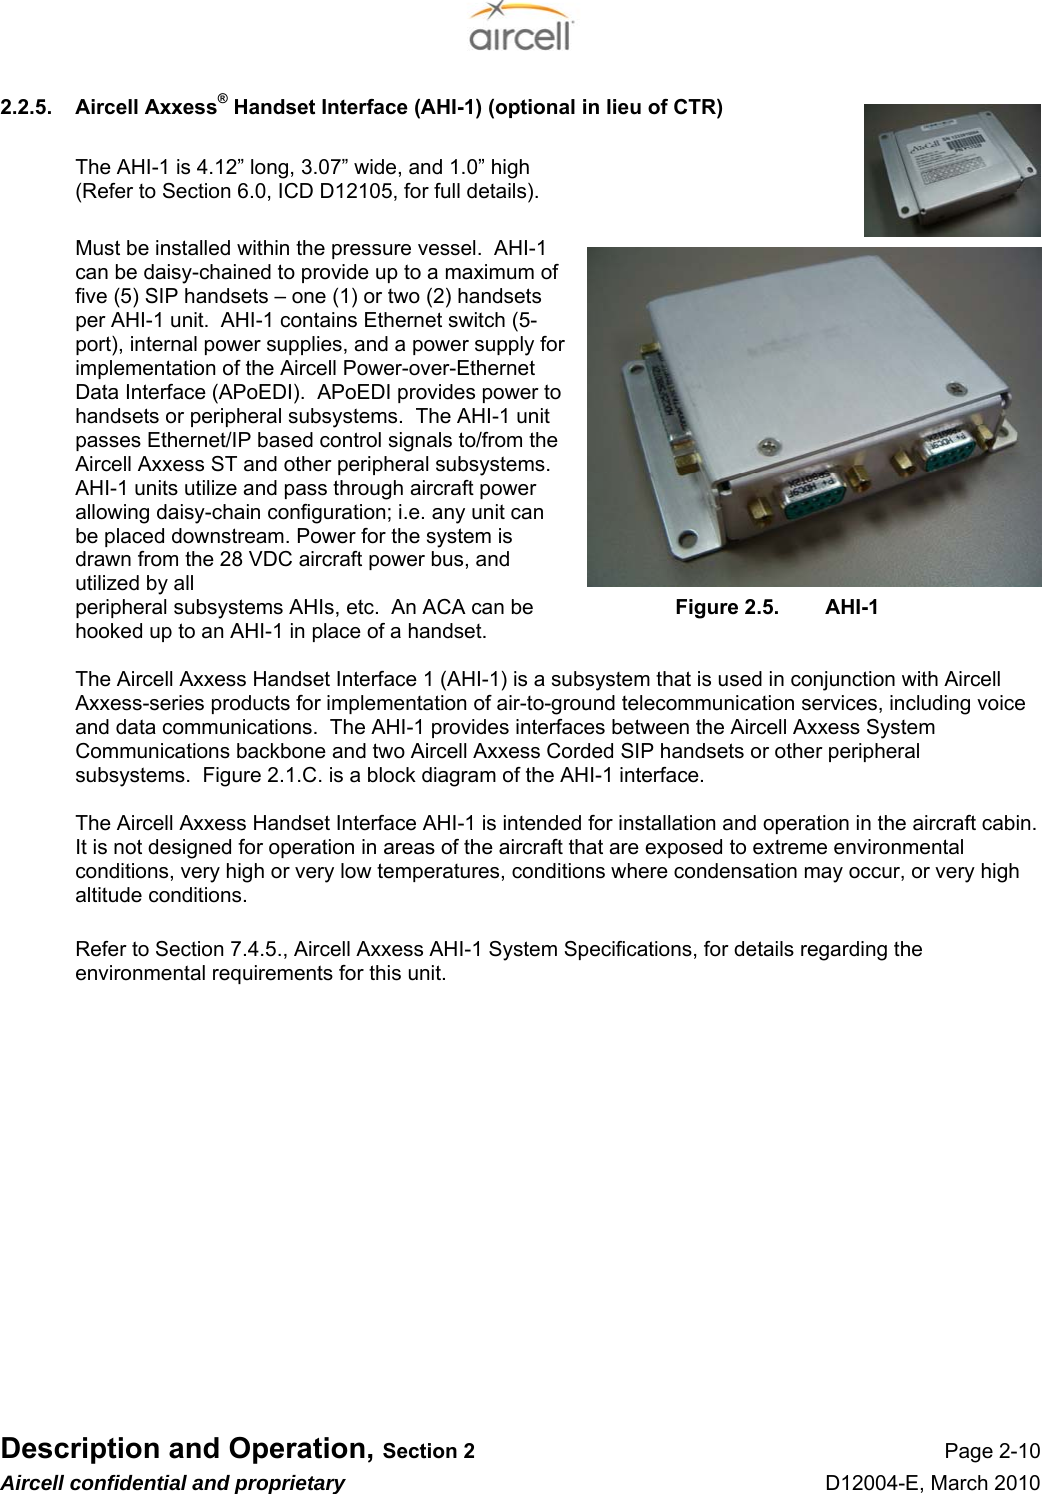  Description and Operation, Section 2 Page 2-10 Aircell confidential and proprietary D12004-E, March 2010 2.2.5.  Aircell Axxess® Handset Interface (AHI-1) (optional in lieu of CTR)  The AHI-1 is 4.12” long, 3.07” wide, and 1.0” high (Refer to Section 6.0, ICD D12105, for full details).  Must be installed within the pressure vessel.  AHI-1 can be daisy-chained to provide up to a maximum of five (5) SIP handsets – one (1) or two (2) handsets per AHI-1 unit.  AHI-1 contains Ethernet switch (5-port), internal power supplies, and a power supply for implementation of the Aircell Power-over-Ethernet Data Interface (APoEDI).  APoEDI provides power to handsets or peripheral subsystems.  The AHI-1 unit passes Ethernet/IP based control signals to/from the Aircell Axxess ST and other peripheral subsystems.  AHI-1 units utilize and pass through aircraft power allowing daisy-chain configuration; i.e. any unit can be placed downstream. Power for the system is drawn from the 28 VDC aircraft power bus, and utilized by all  peripheral subsystems AHIs, etc.  An ACA can be     Figure 2.5.  AHI-1 hooked up to an AHI-1 in place of a handset.  The Aircell Axxess Handset Interface 1 (AHI-1) is a subsystem that is used in conjunction with Aircell Axxess-series products for implementation of air-to-ground telecommunication services, including voice and data communications.  The AHI-1 provides interfaces between the Aircell Axxess System Communications backbone and two Aircell Axxess Corded SIP handsets or other peripheral subsystems.  Figure 2.1.C. is a block diagram of the AHI-1 interface.  The Aircell Axxess Handset Interface AHI-1 is intended for installation and operation in the aircraft cabin.  It is not designed for operation in areas of the aircraft that are exposed to extreme environmental conditions, very high or very low temperatures, conditions where condensation may occur, or very high altitude conditions.  Refer to Section 7.4.5., Aircell Axxess AHI-1 System Specifications, for details regarding the environmental requirements for this unit.             